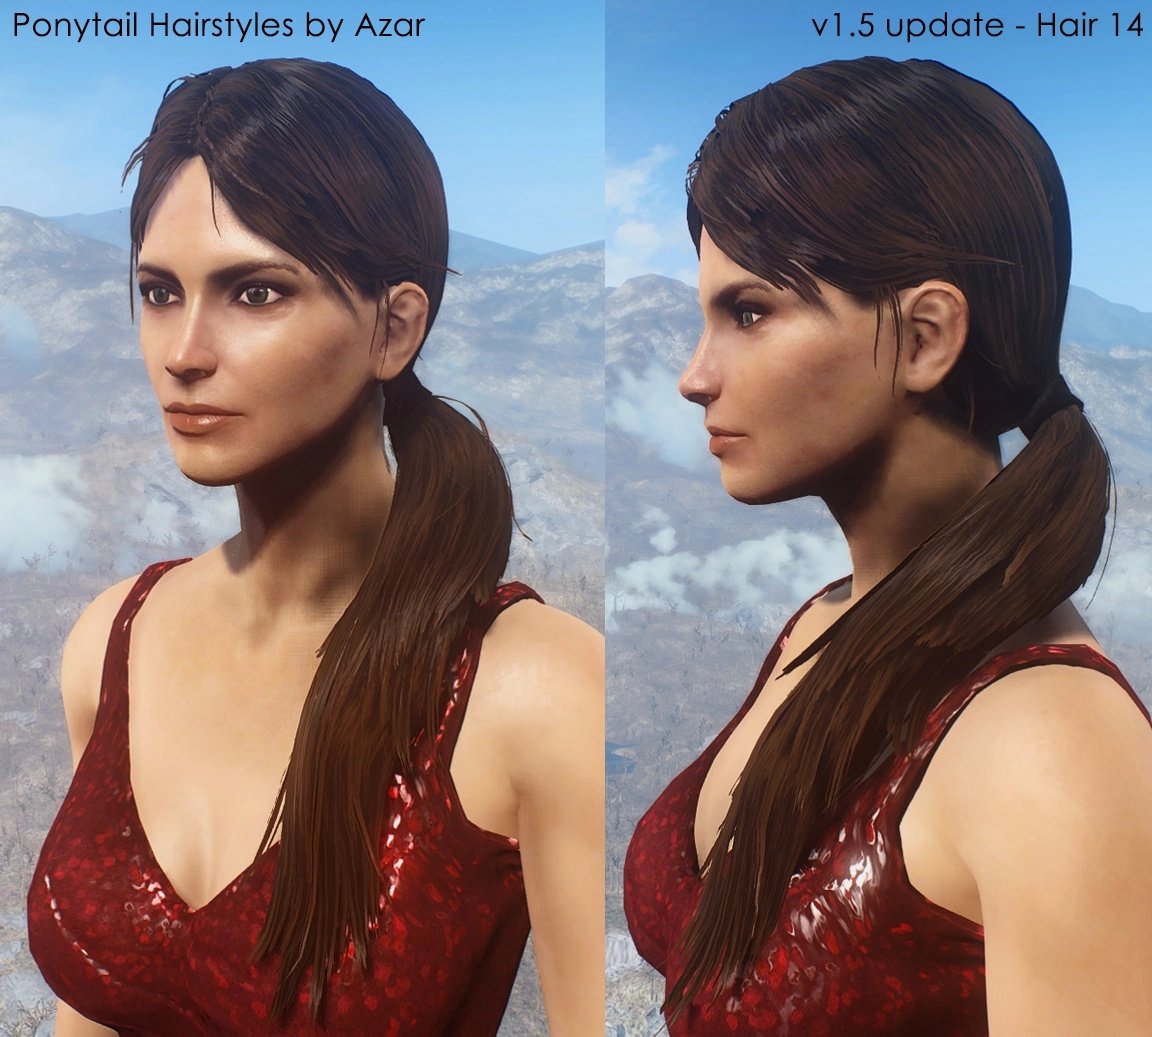 Ponytail hairstyles fallout 4 фото 22